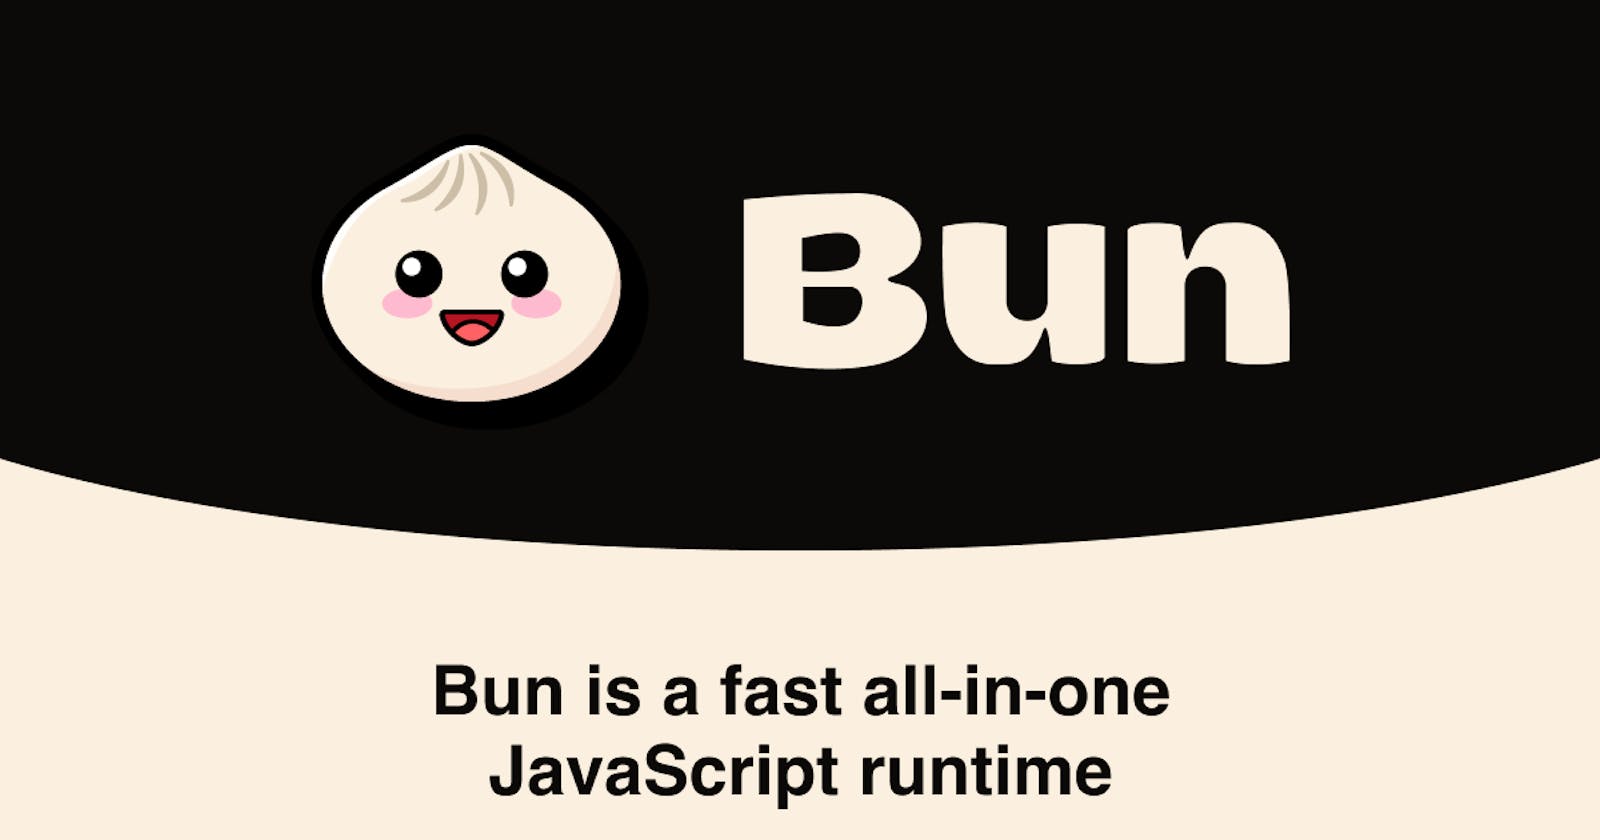 What’s all the hype around Bun? Will it replace Node?